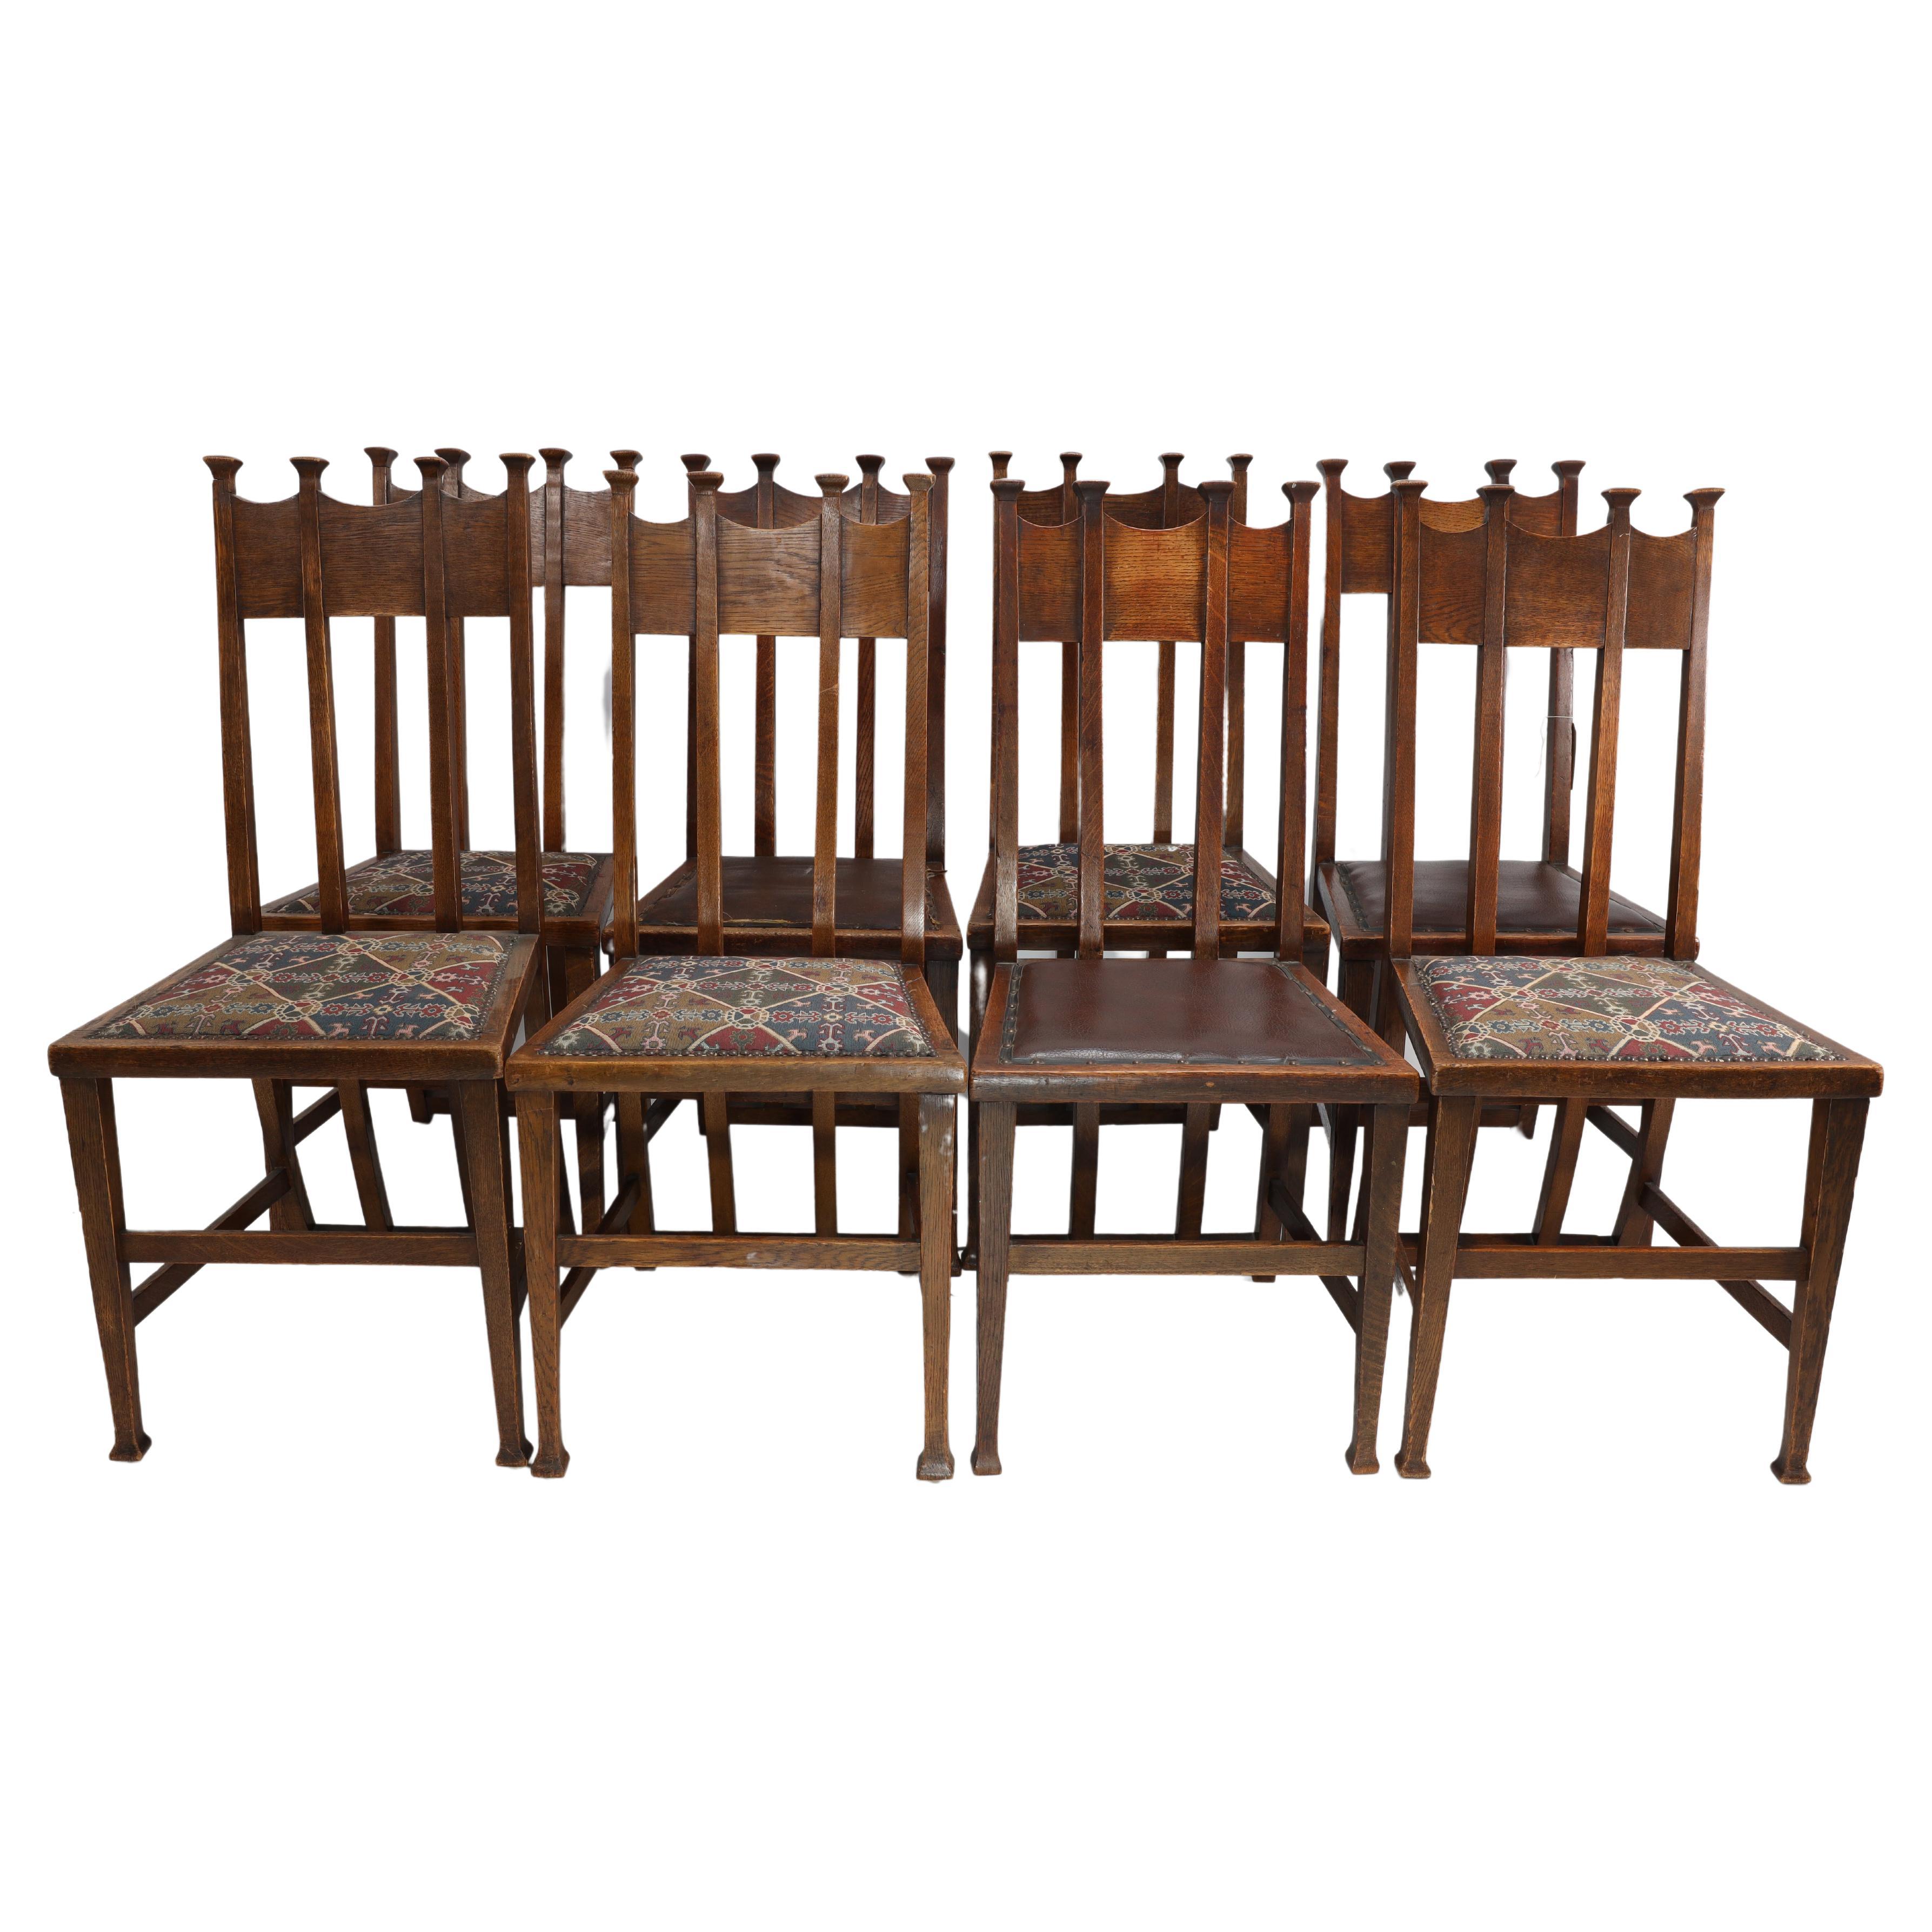 George Montague Ellwood. Made by J S Henry. A rare set of ten oak dining chairs.